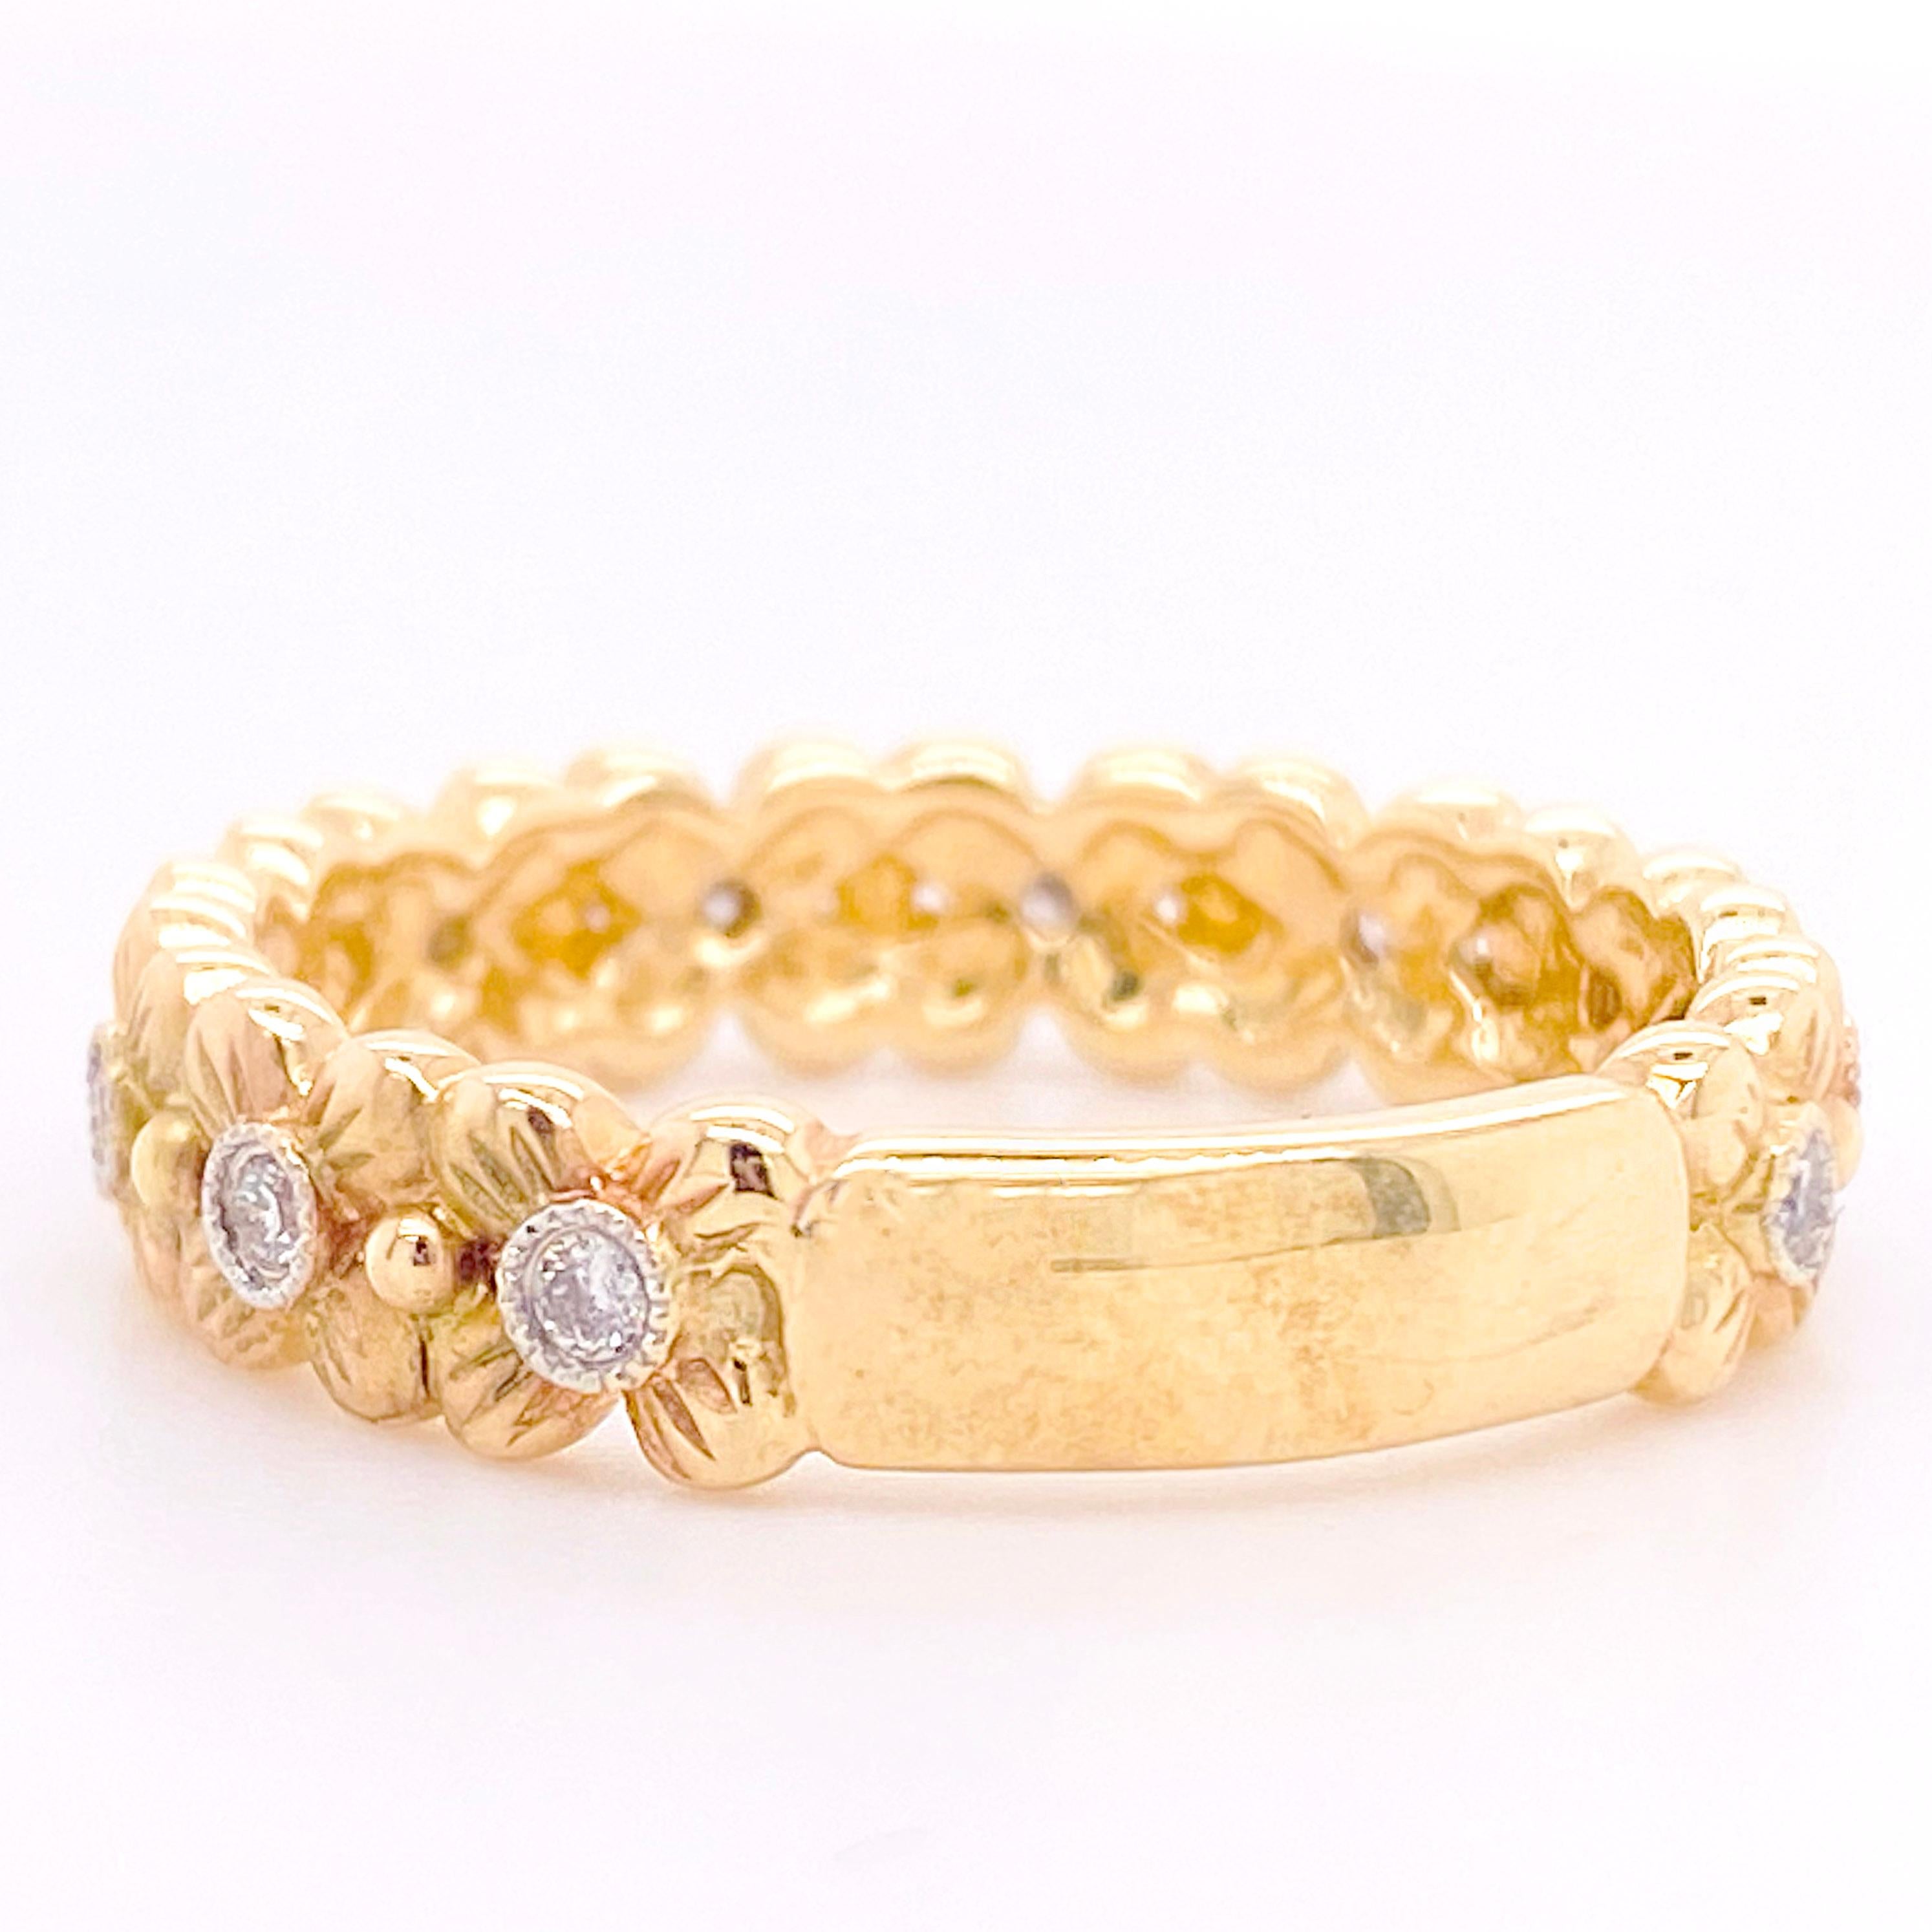 For Sale:  Flowery Design Band by Five Star Jewelry, Flower Eternity Band Sizing Available 2